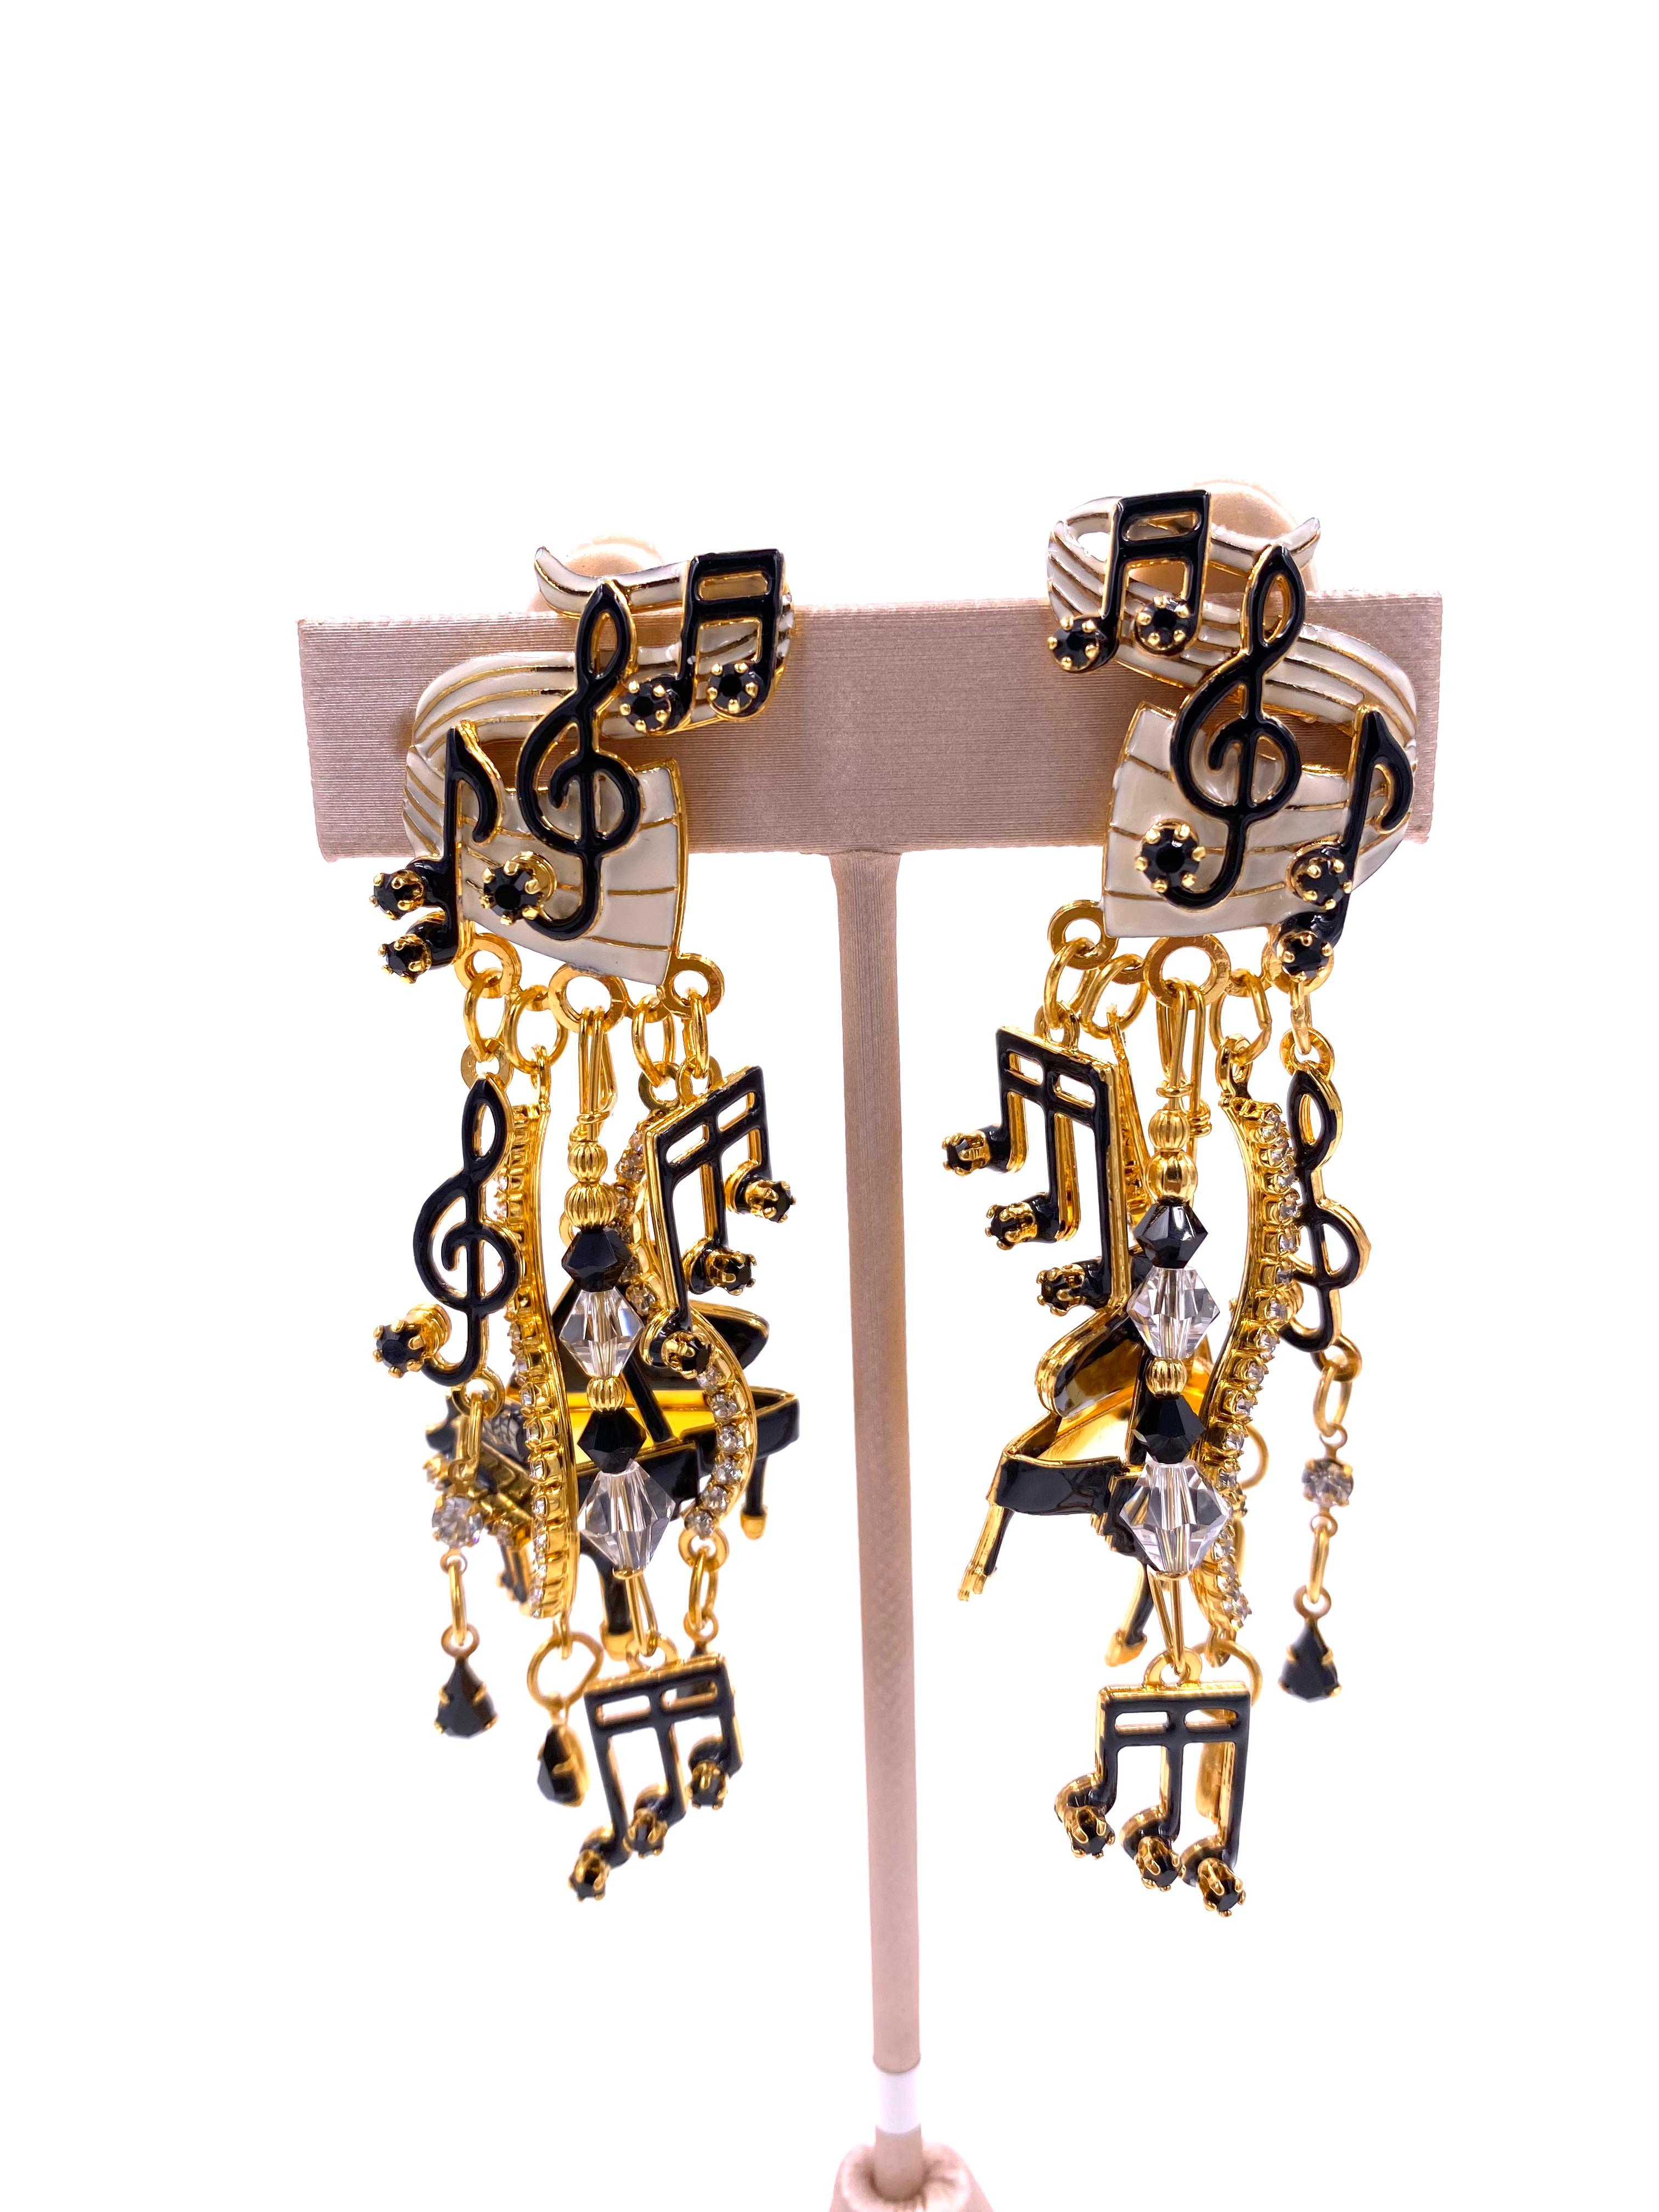 with our Lunch at the Ritz Earrings. These exclusive dangle earrings feature music notes, black rhinestones, and clear beads. Perfect for music lovers and those who appreciate luxurious and tasteful accessories.

Length: 3.5